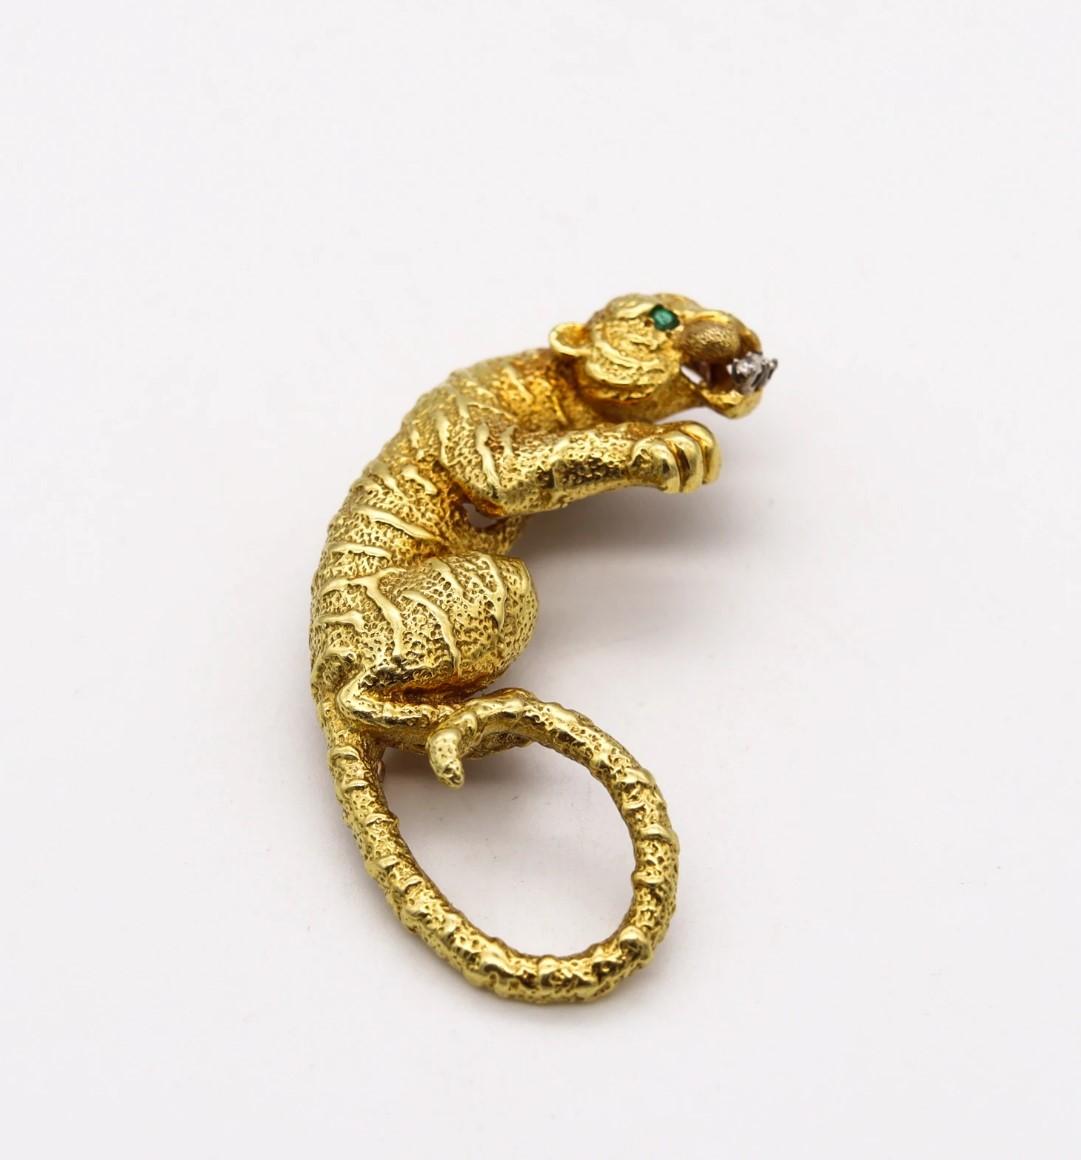 Modernist Hammerman Brothers 1970 Tiger Brooch in 18Kt Gold with Emerald and Diamonds